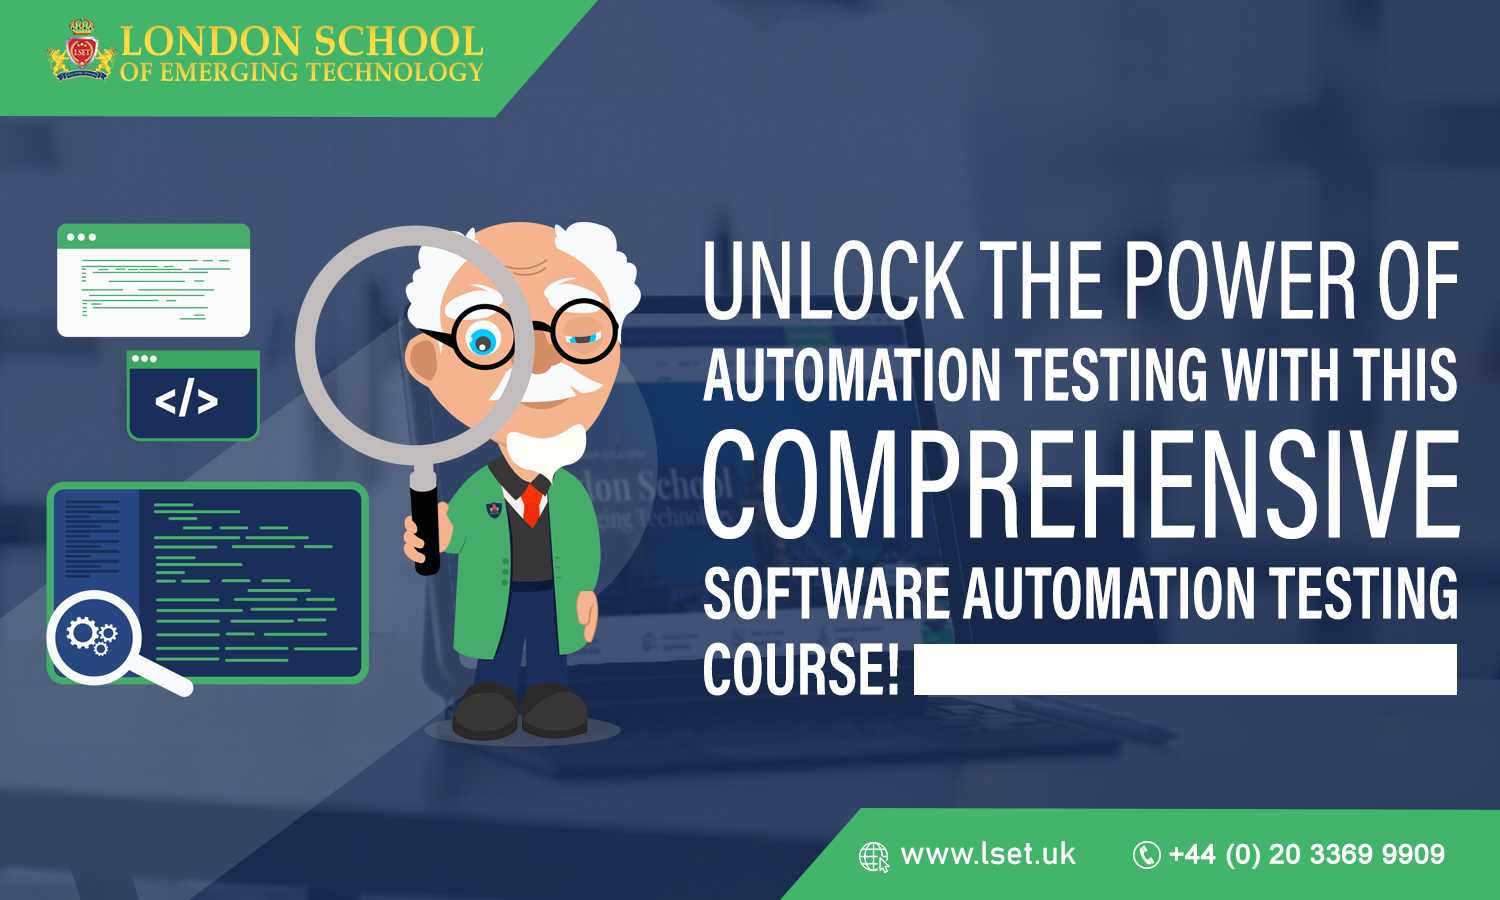 Unlock the Power of Automation Testing with this Comprehensive Software Automation Testing Course